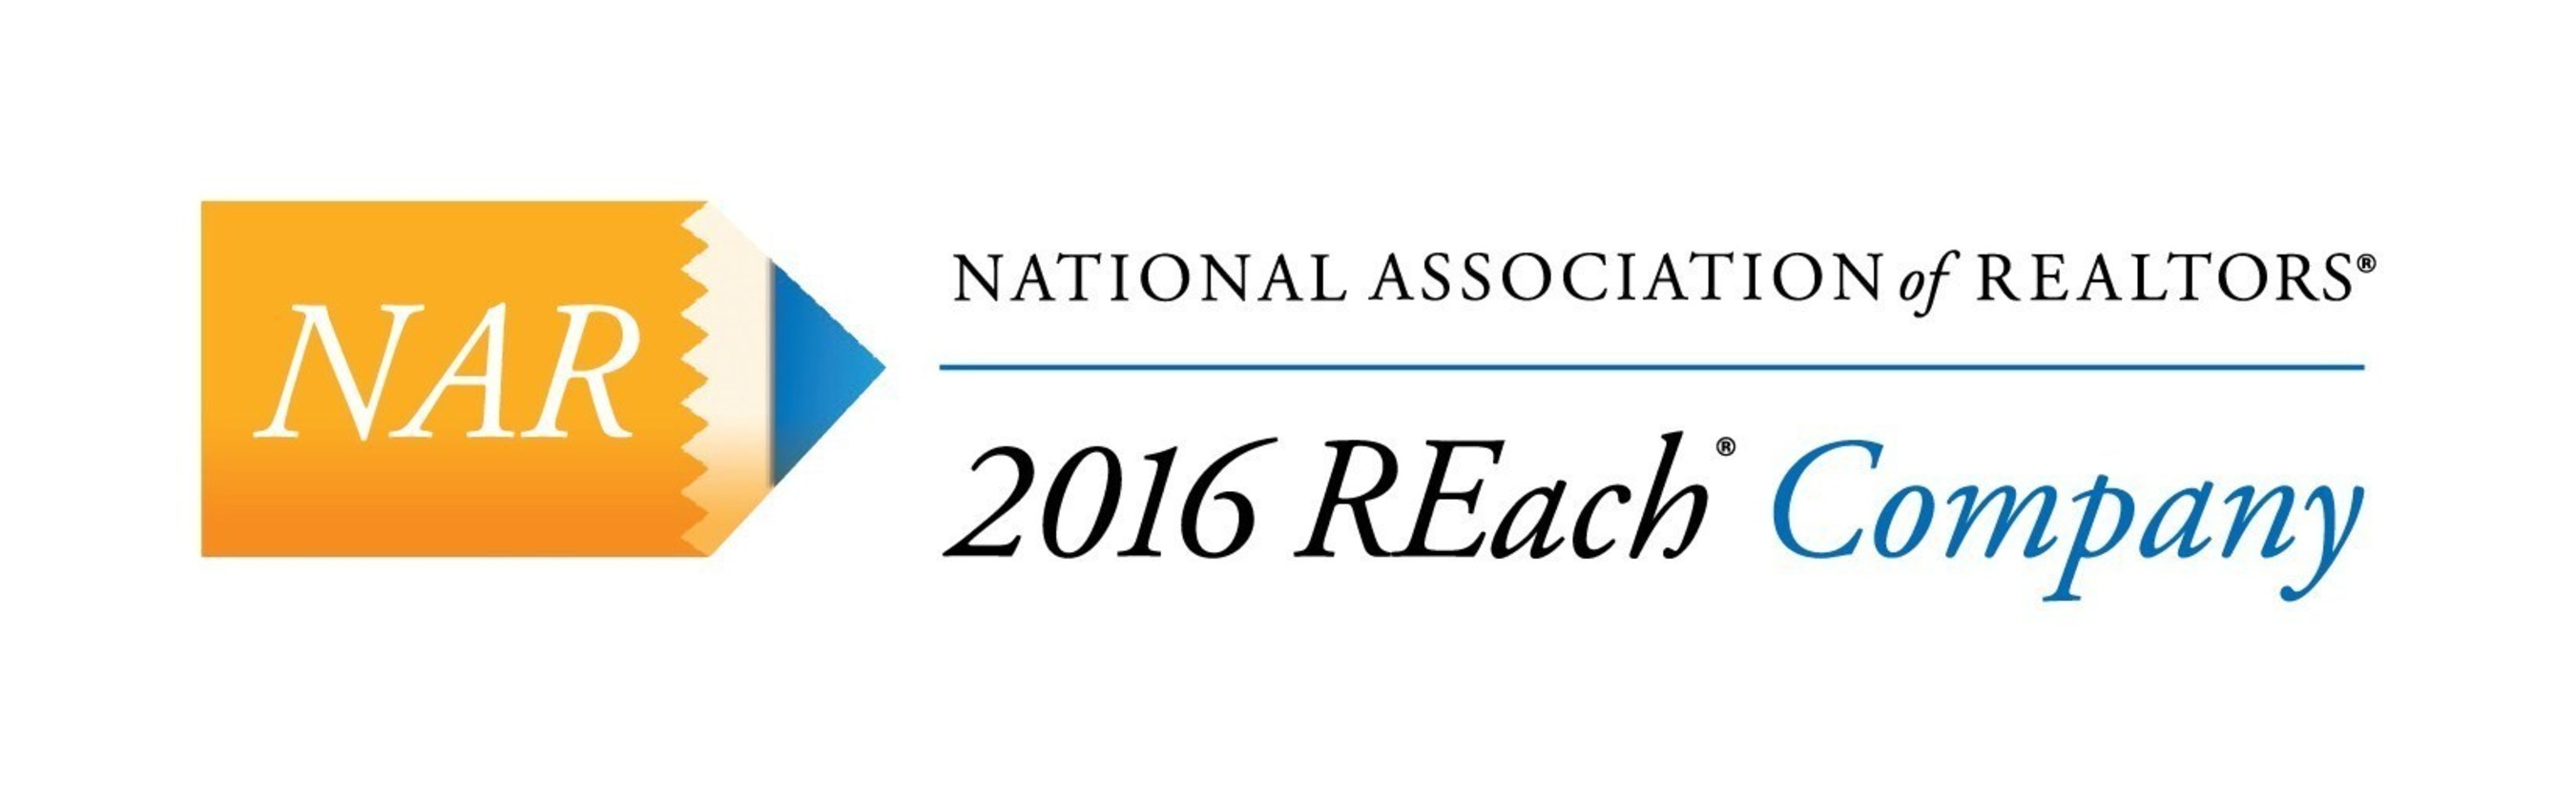 REach(R) provides unparalleled access to the best minds in the business. NAR is "The Voice for Real Estate." With over 1 million members, it is the nation's largest trade association.  It is the authoritative resource for economic industry data and reaches millions of constituents, including consumers, banks, insurance and, of course, REALTORS(R) every single day.